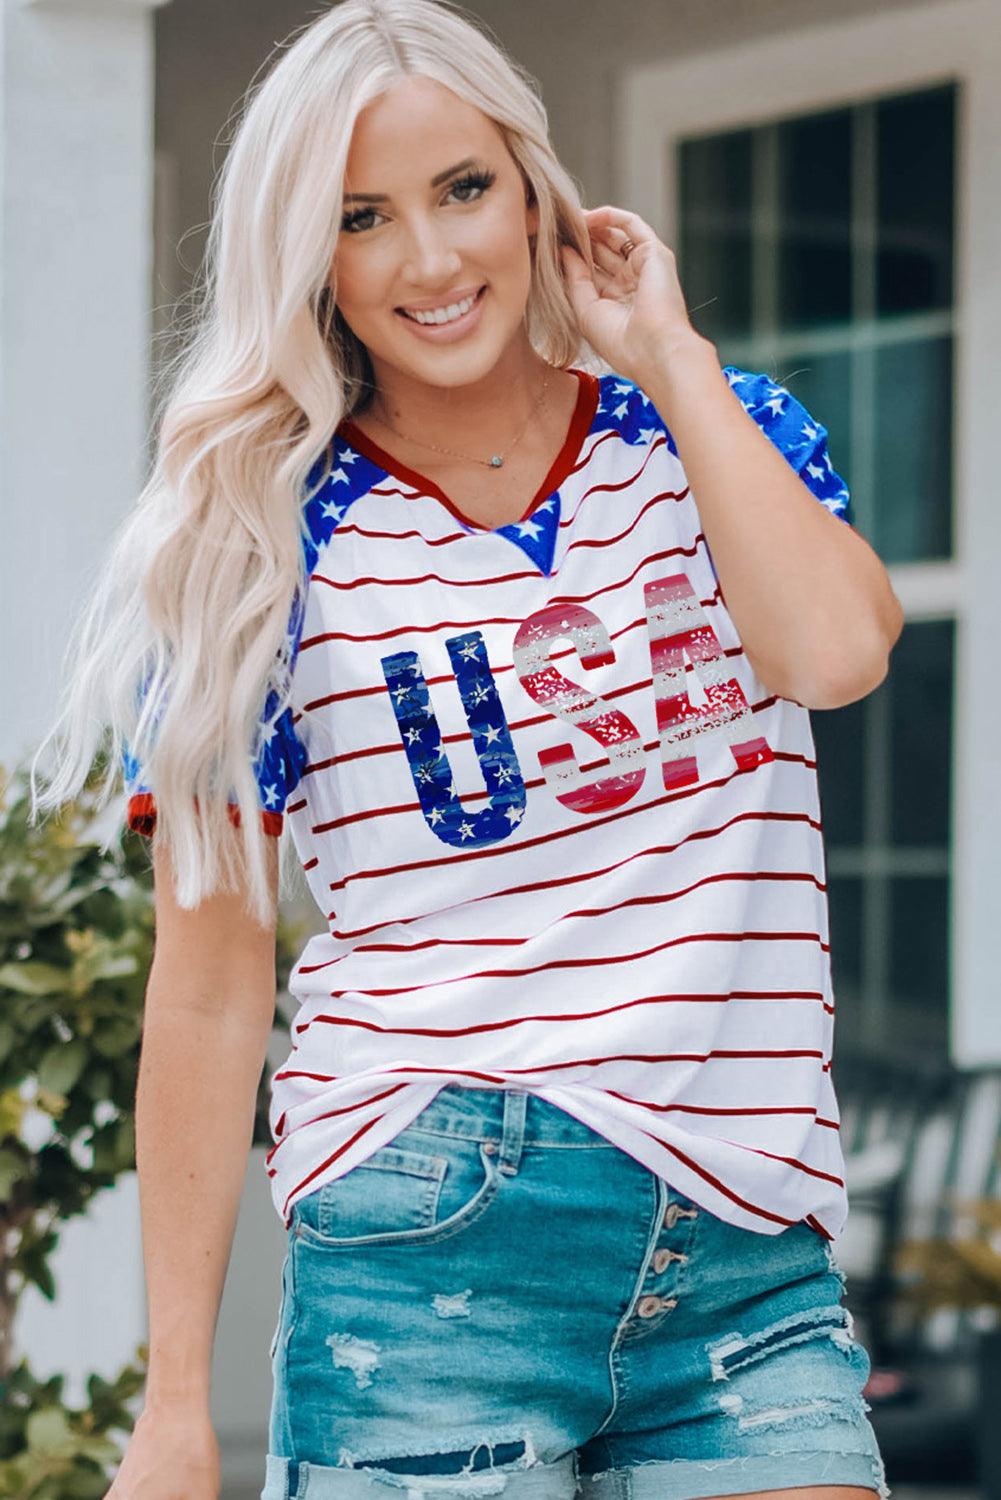 Stars and Stripes National Day Tee - L & M Kee, LLC